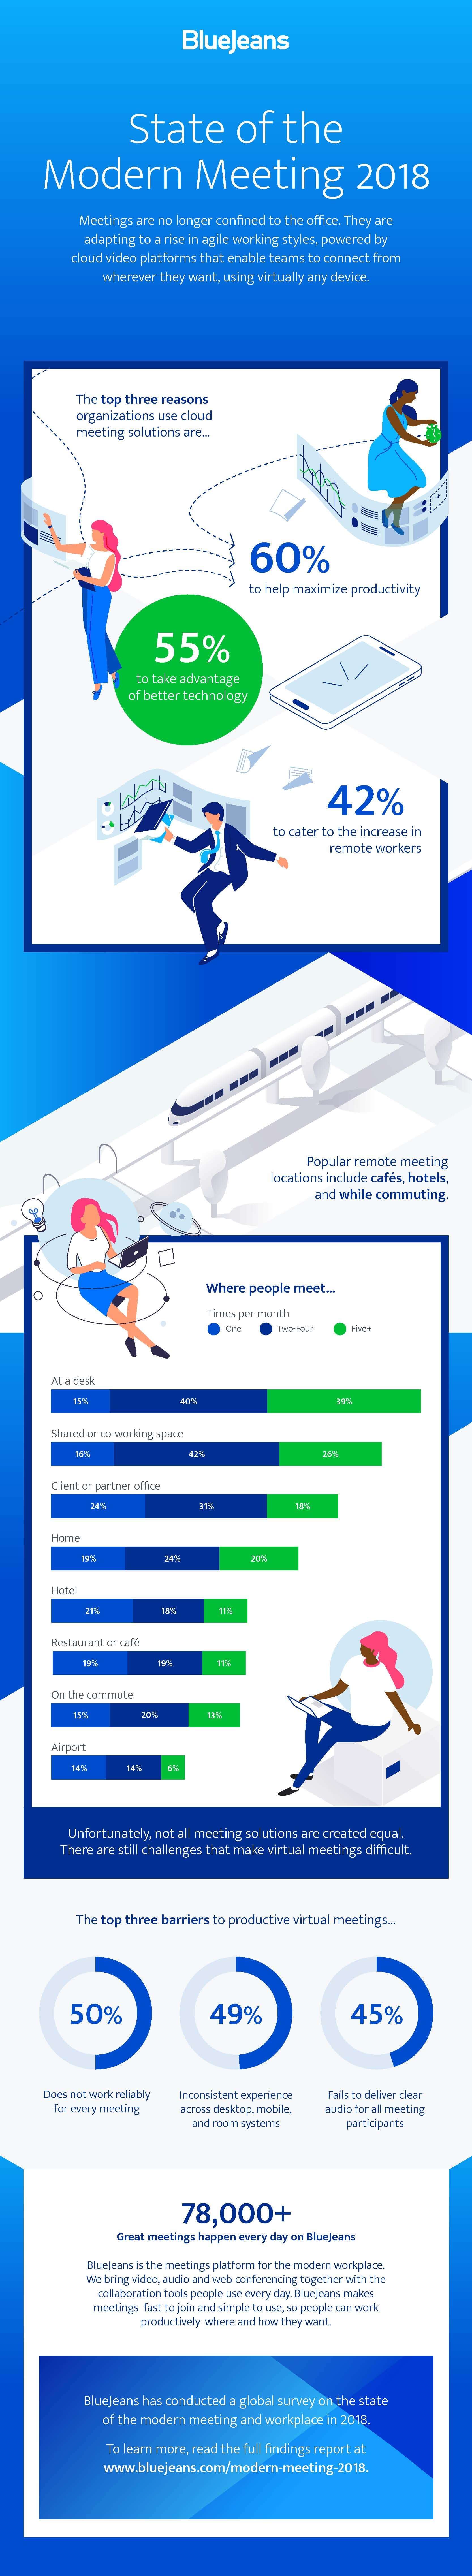 State of the Modern Meeting 2018 Infographic